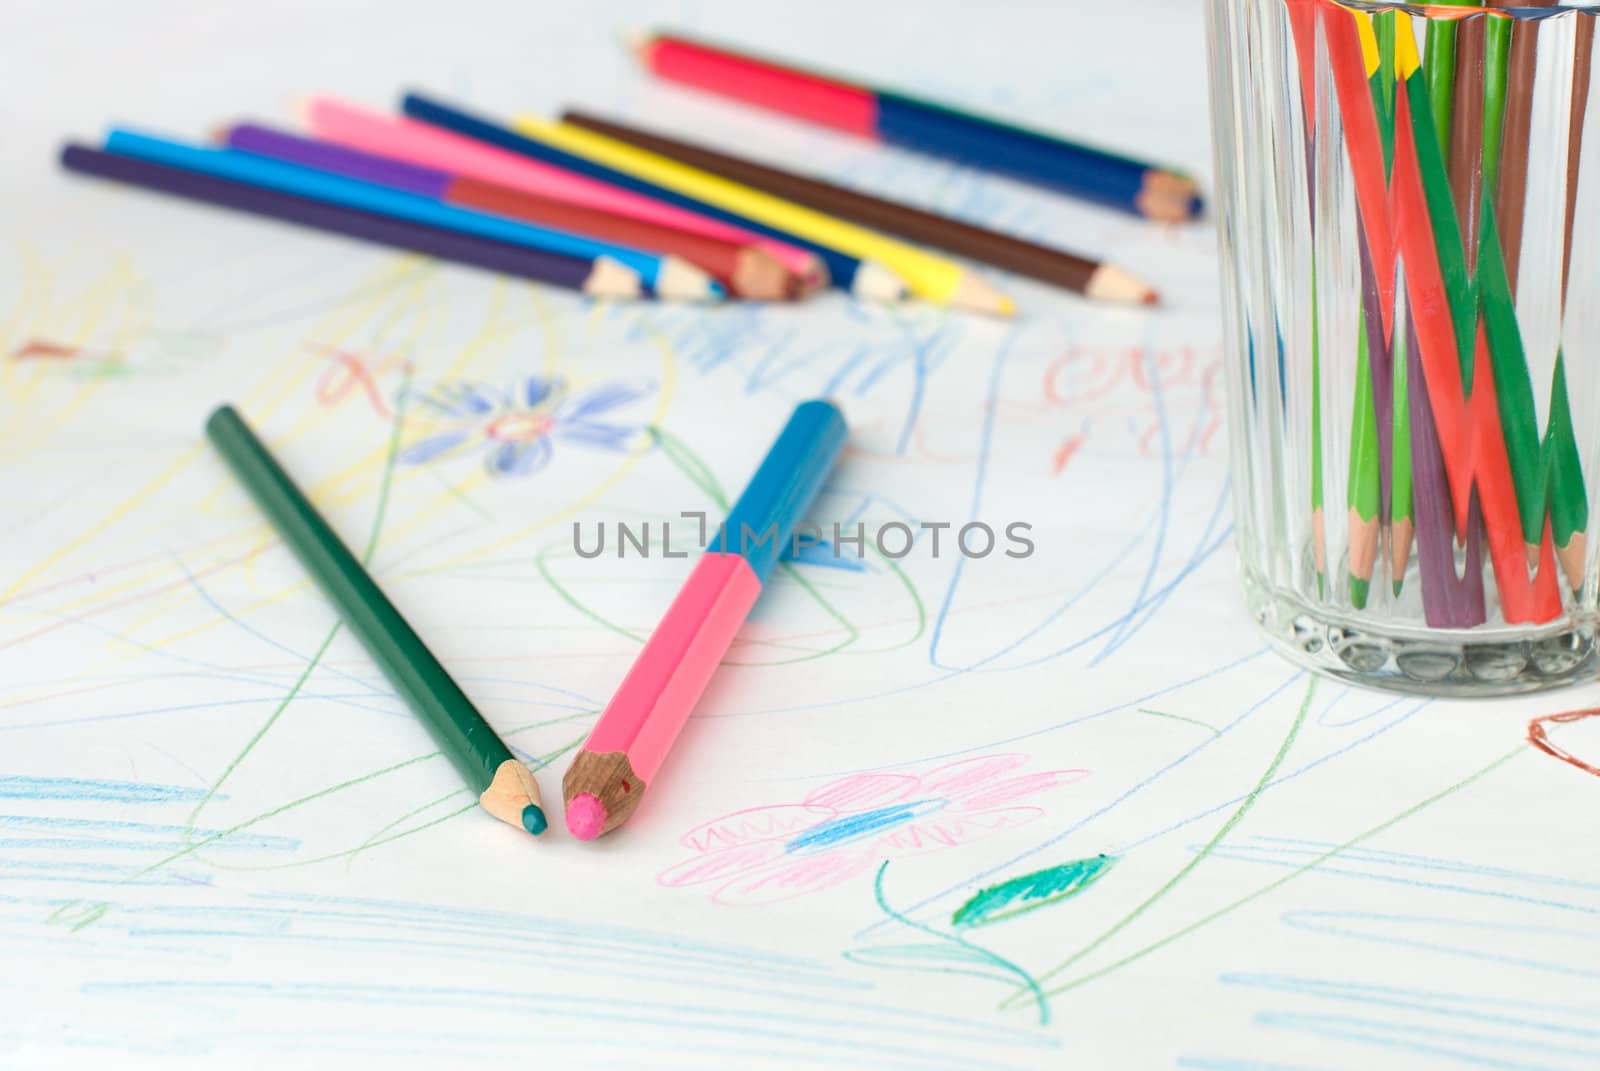 Colored pencils on a child's drawing